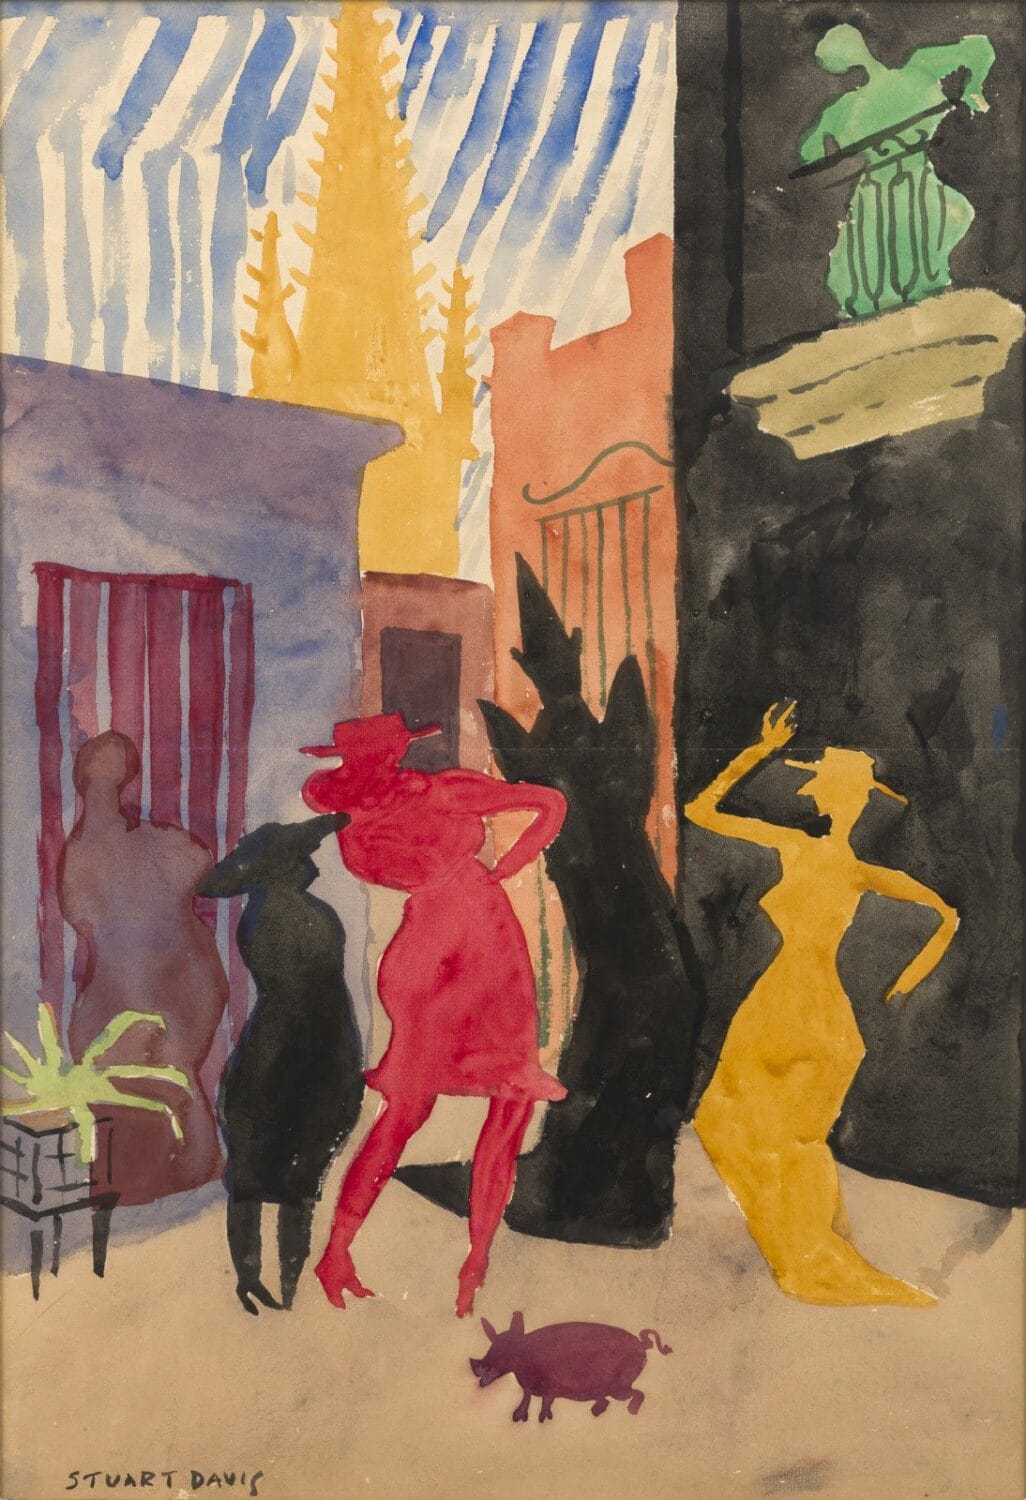 Dancers on Havana Street), 1920, watercolor on paper, 22 7/8 x 15 5/8 inches (sight), 58.1 x 39.7 cm, 24 15/16 x 19 inches (sheet), 63.2 x 48.3 cm. © 2021 Estate of Stuart Davis. / Licensed by VAGA at Artists Rights Society (ARS), NY.